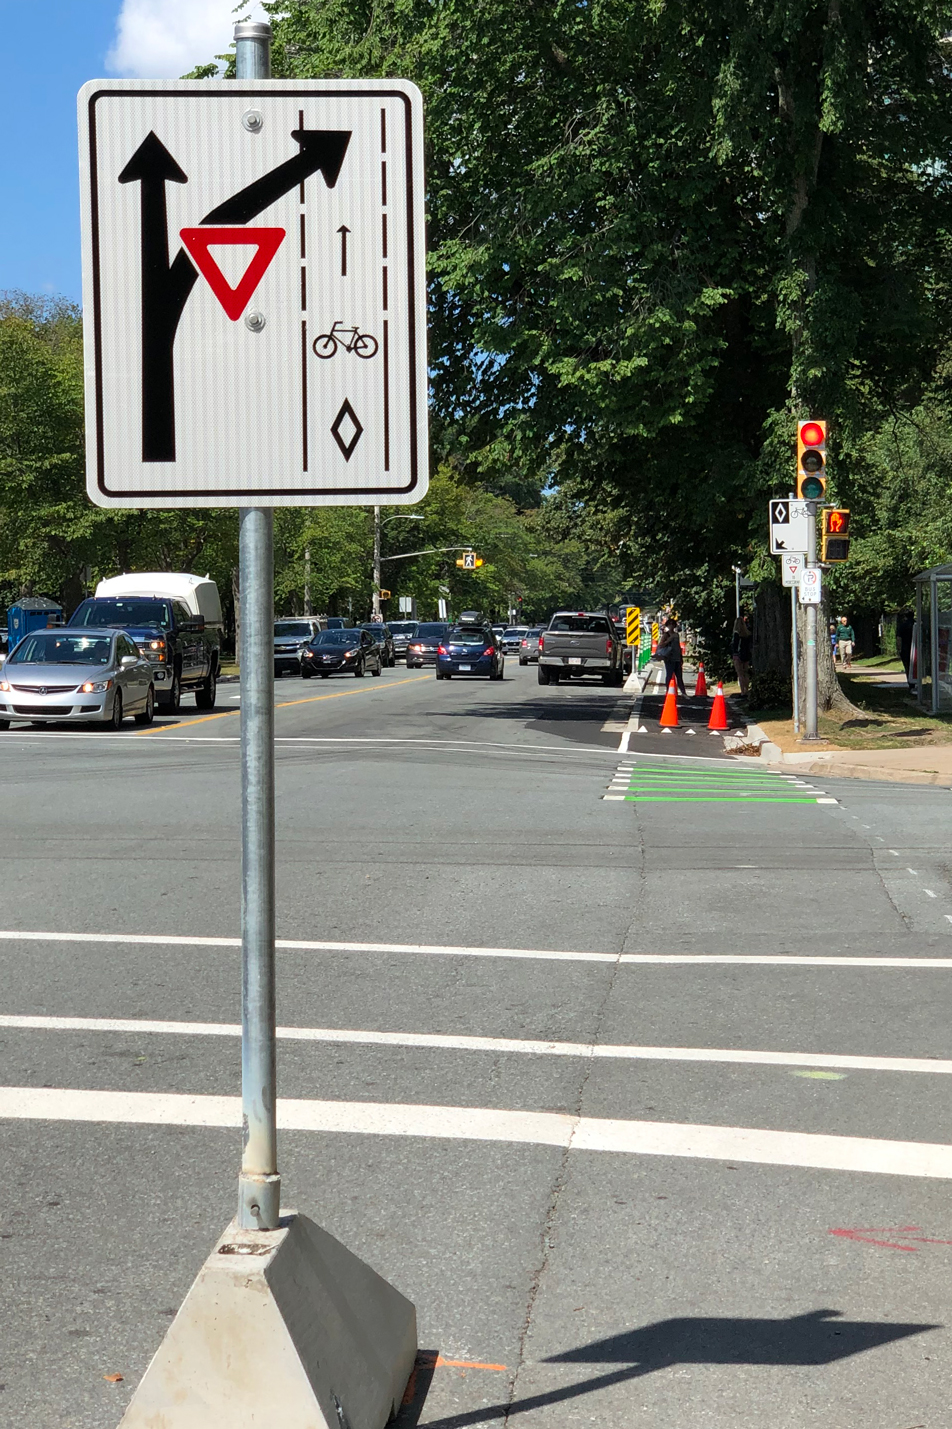 Right turning vehicles must yield to cyclists in the bike lane